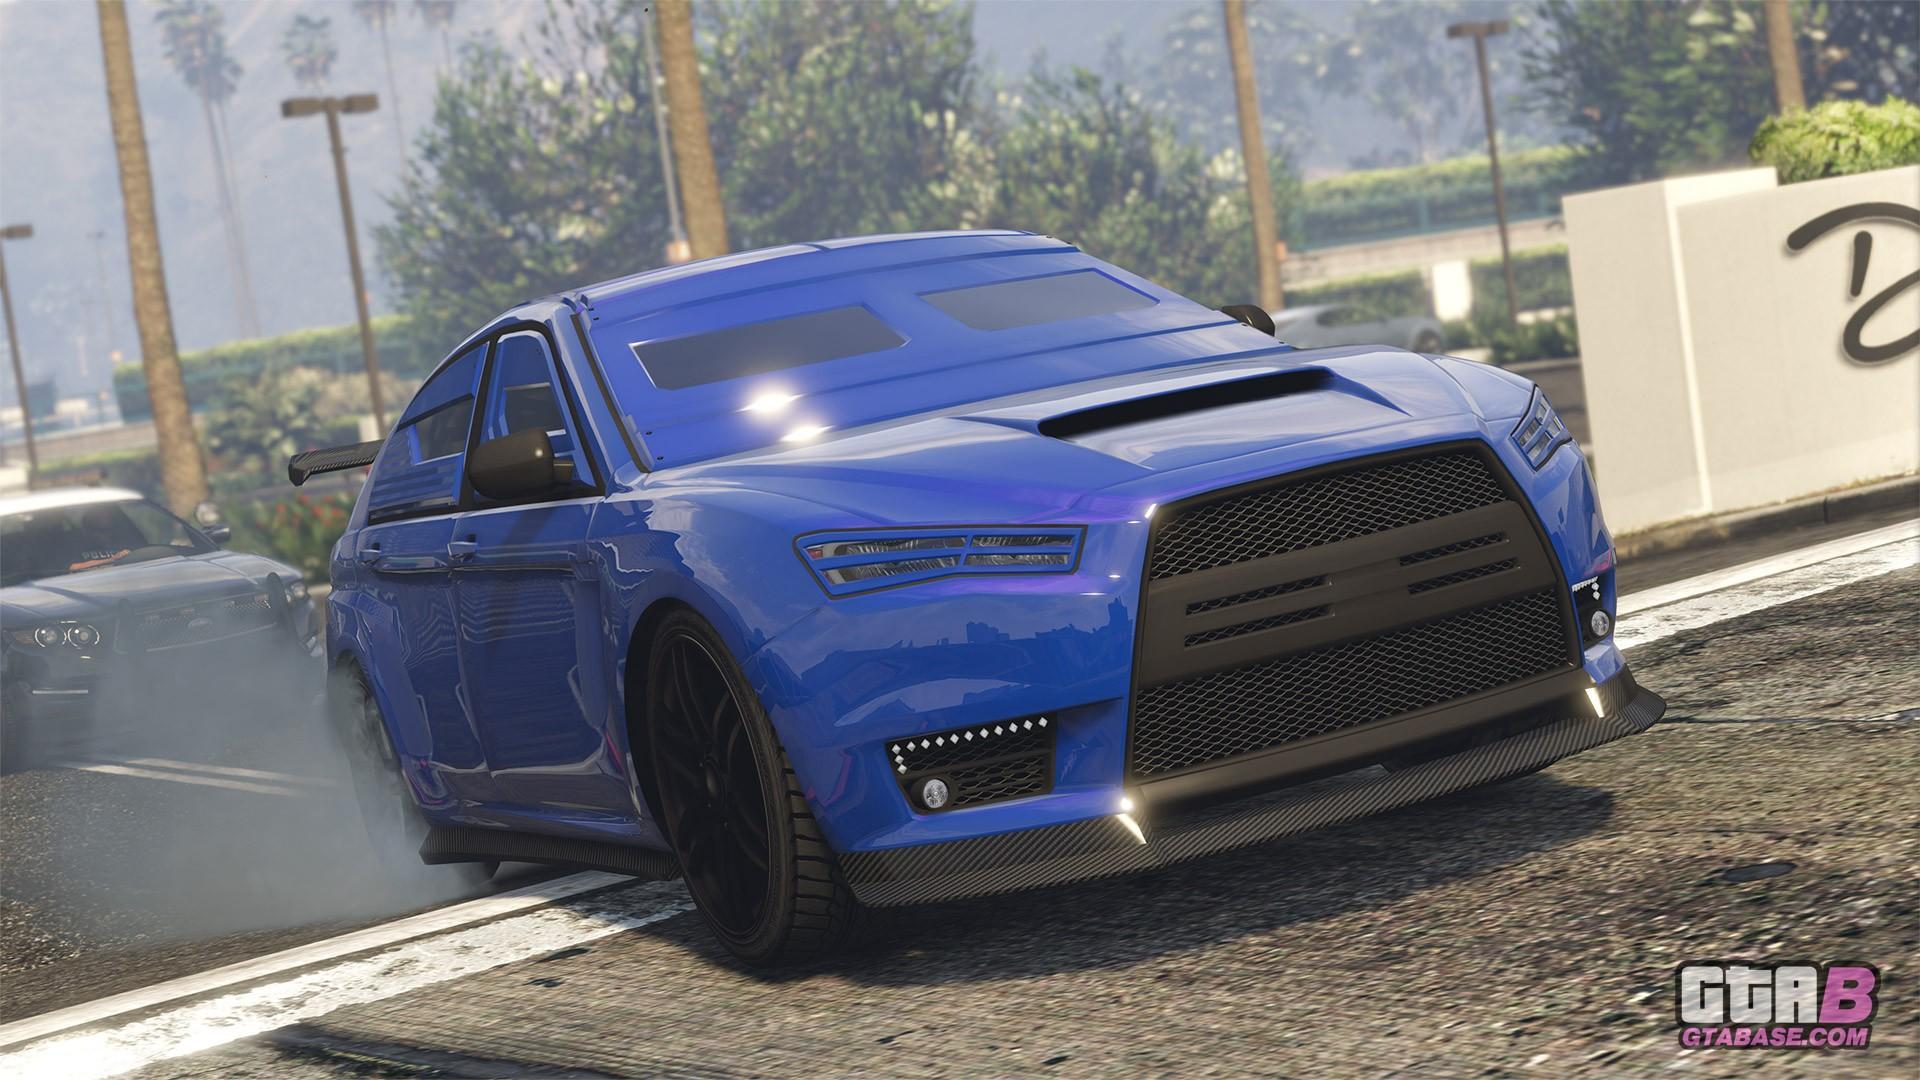 How to get an Armored Kuruma for free in GTA Online